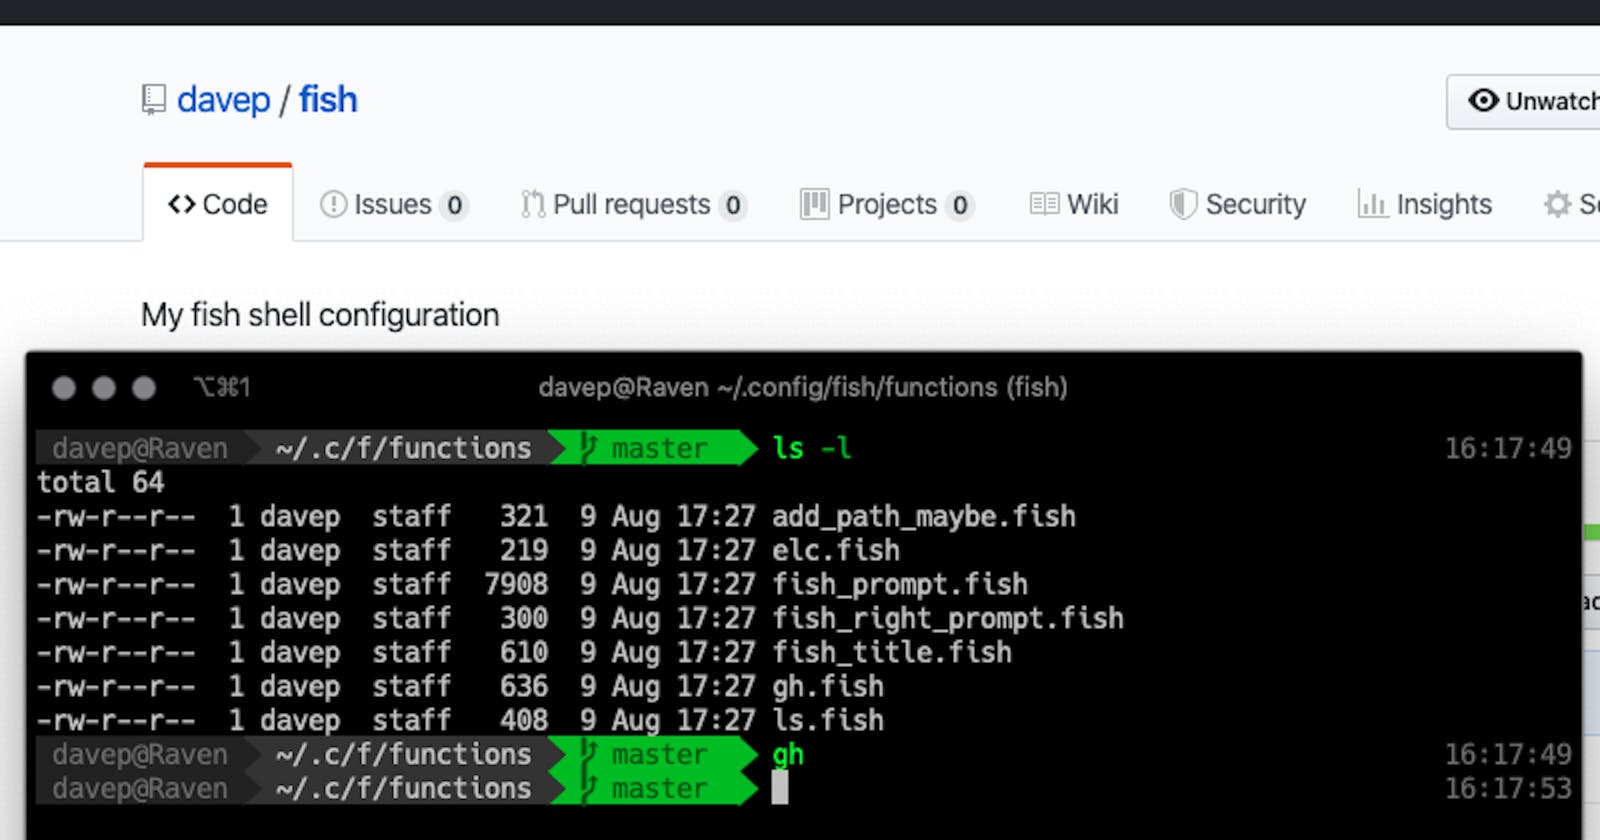 gh.fish -- Quickly visit a repo's "forge"